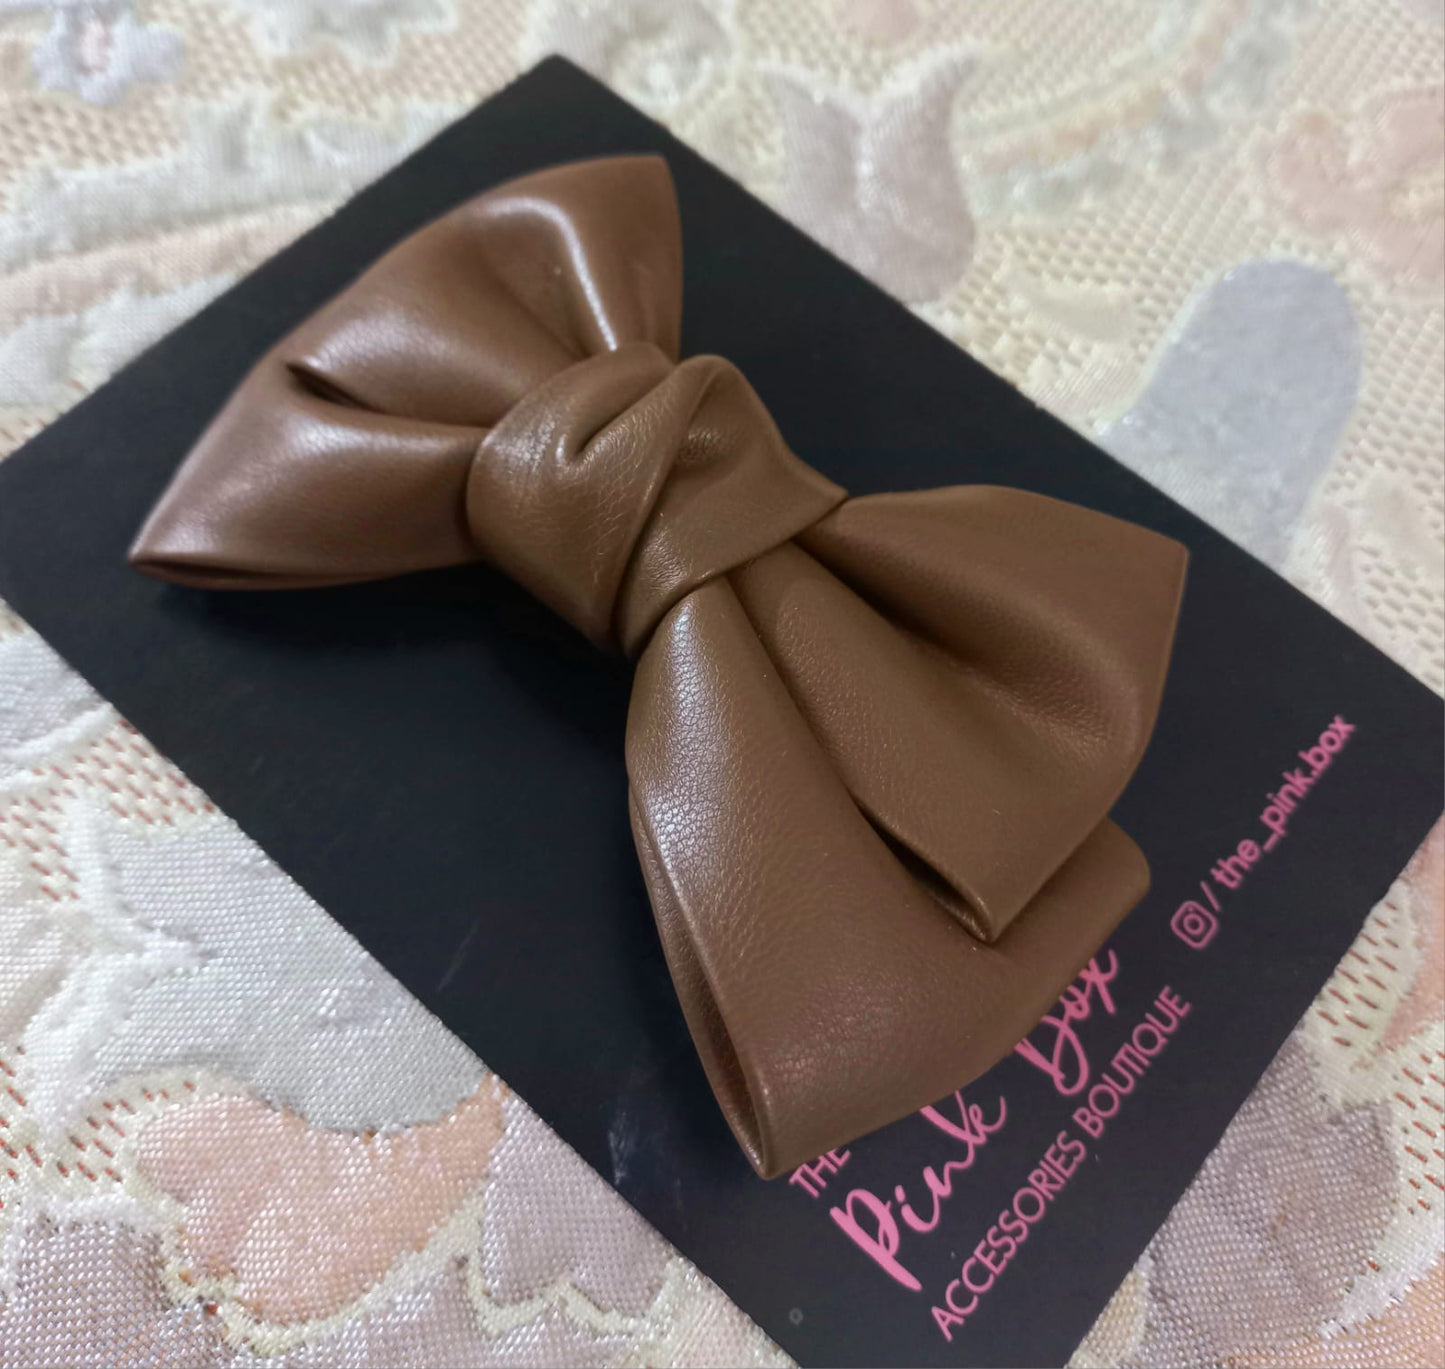 Leather Bow